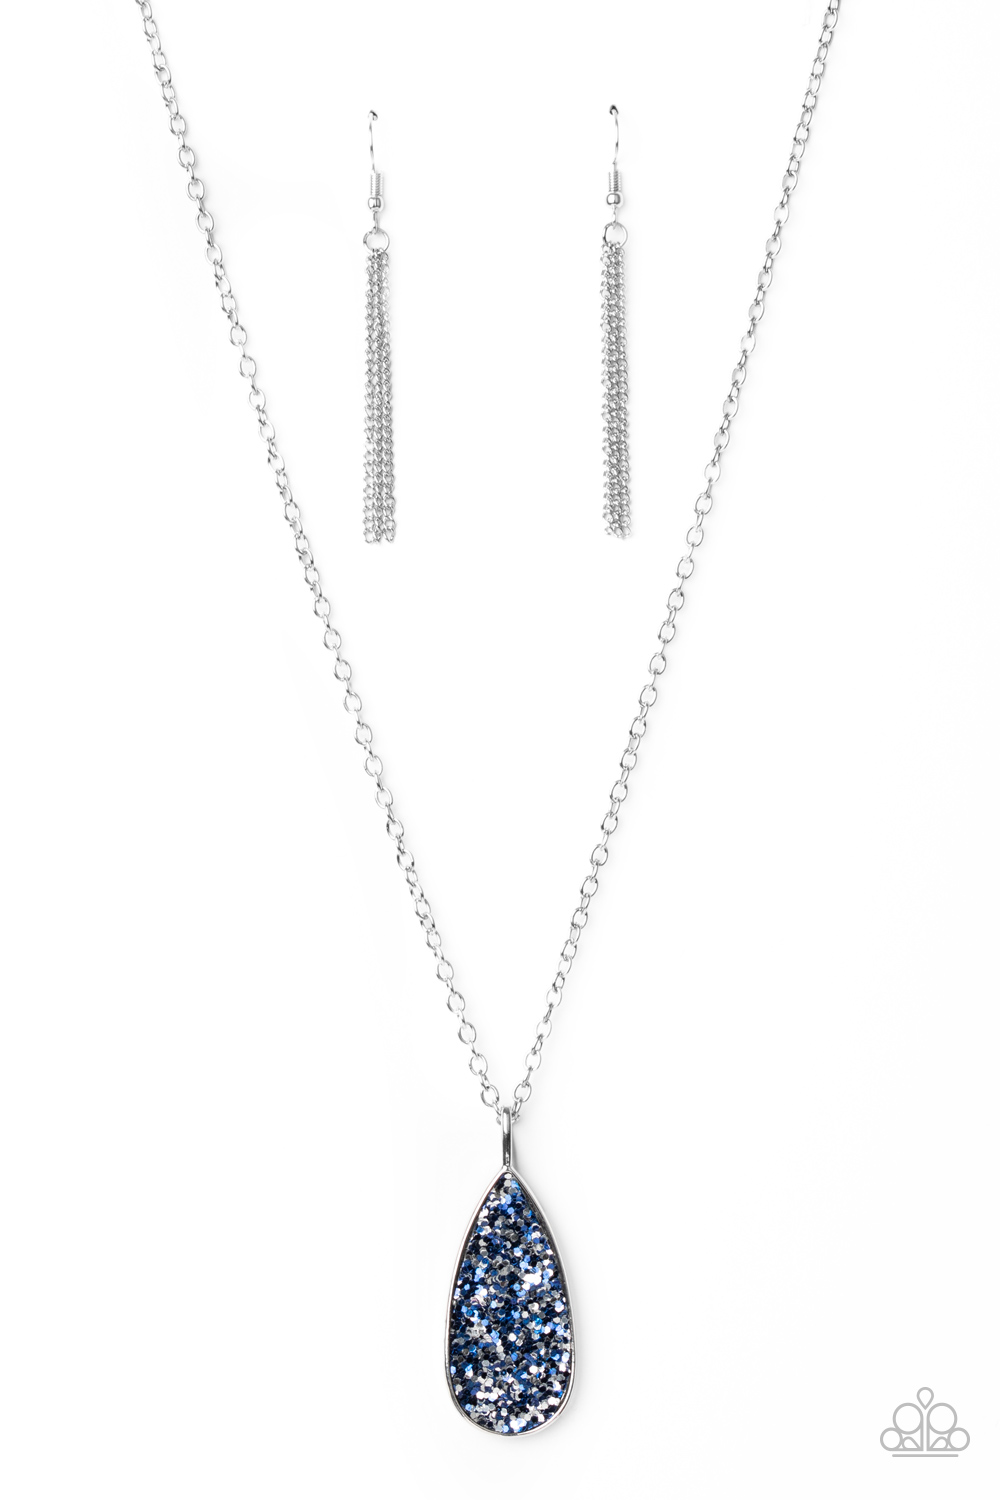 Necklace - Daily Dose of Sparkle - Blue